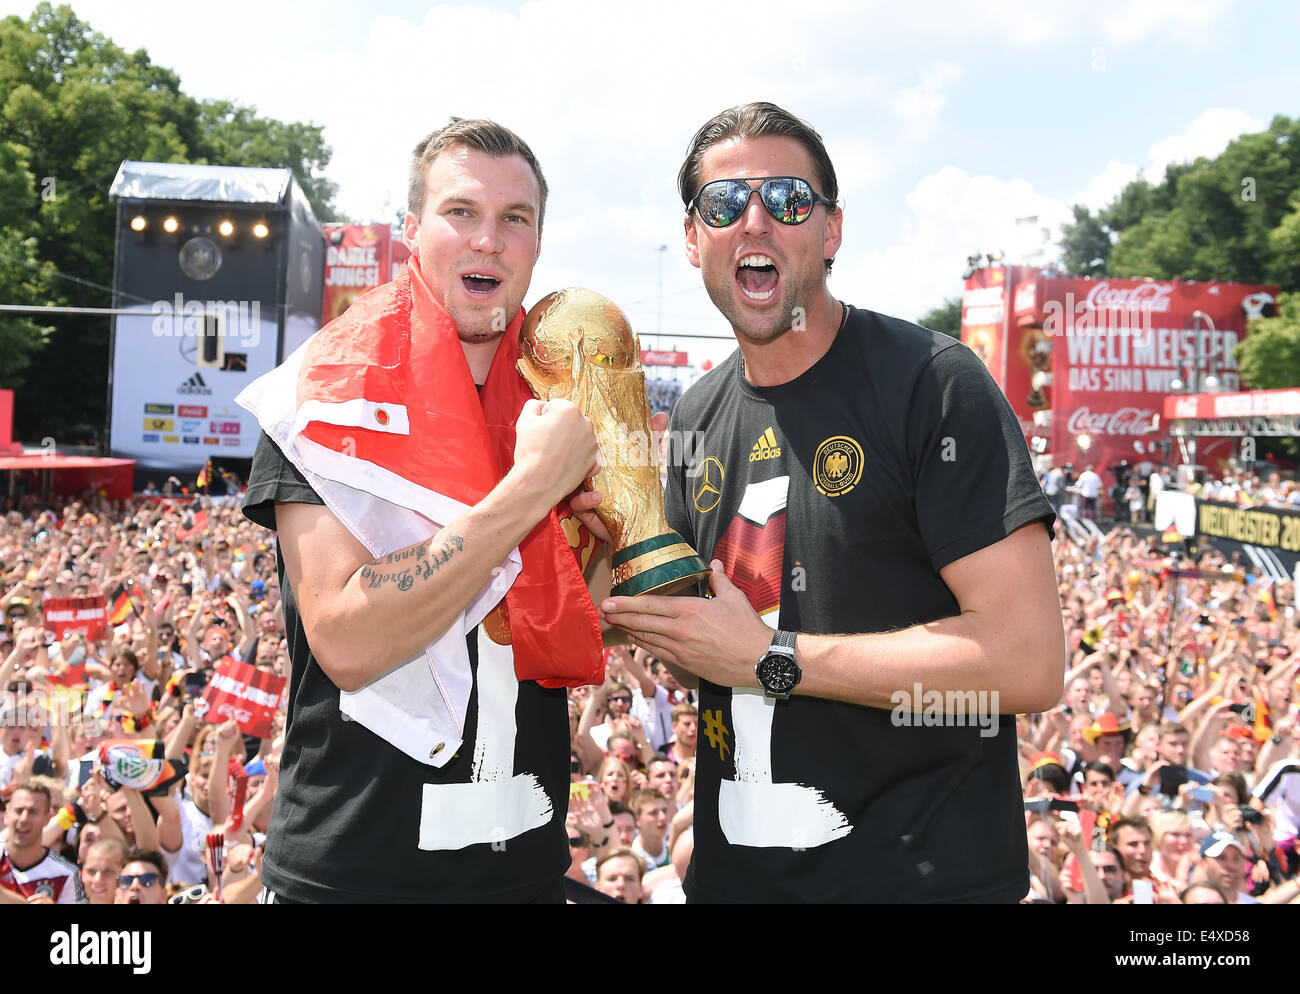 HANDOUT - Germany's Kevin Grosskreutz (L-R) and goal keeper Roman WEIDENFELLER celebrate with the World Cup trophy during the World Cup party at the Brandenburg Gate after team Germany arrived back in Germany in Berlin, Germany, 15 July 2014. The German team won the Brazil 2014 FIFA Soccer World Cup final against Argentina by 1-0 on 13 July 2014, winning the world cup title for the fourth time after 1954, 1974 and 1990. Photo: Markus Gilliar/GES/DFB/dpa (ATTENTION: Editorial use only and mandatory credit "Photo: Markus Gilliar/GES/DFB/dpa") Stock Photo